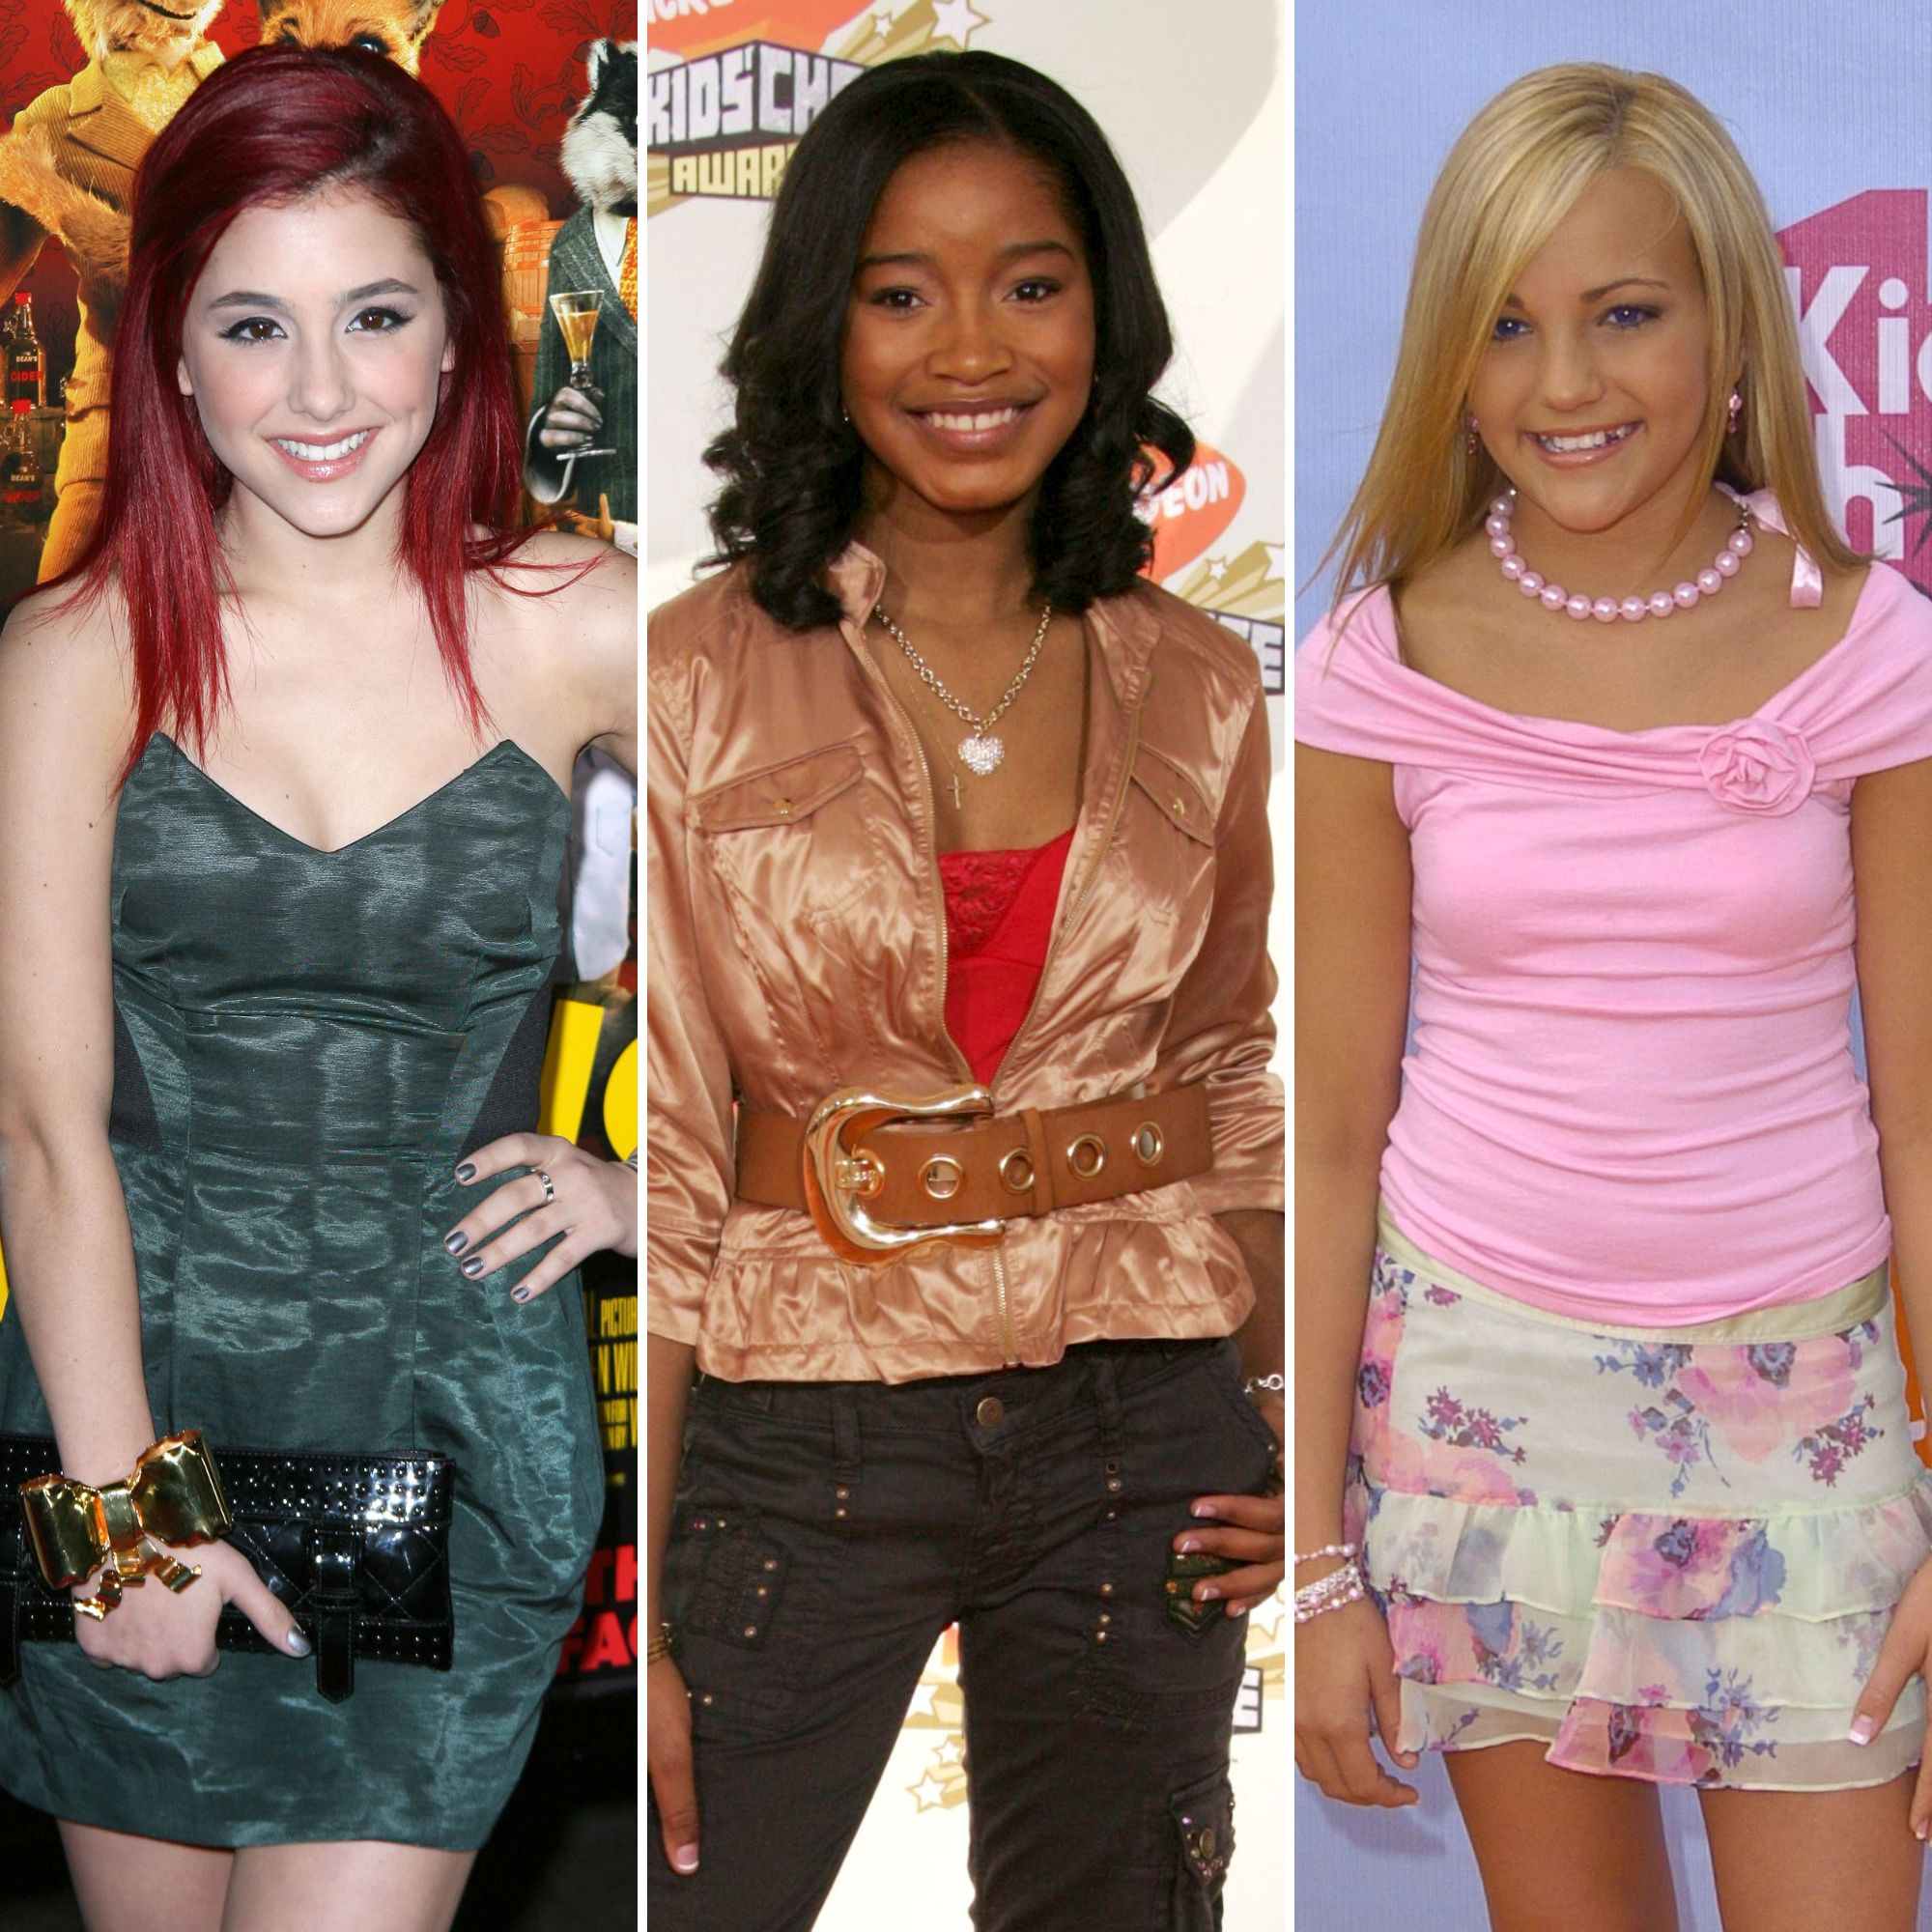 Nickelodeon Girls Who Look Different: Then, Now Photos